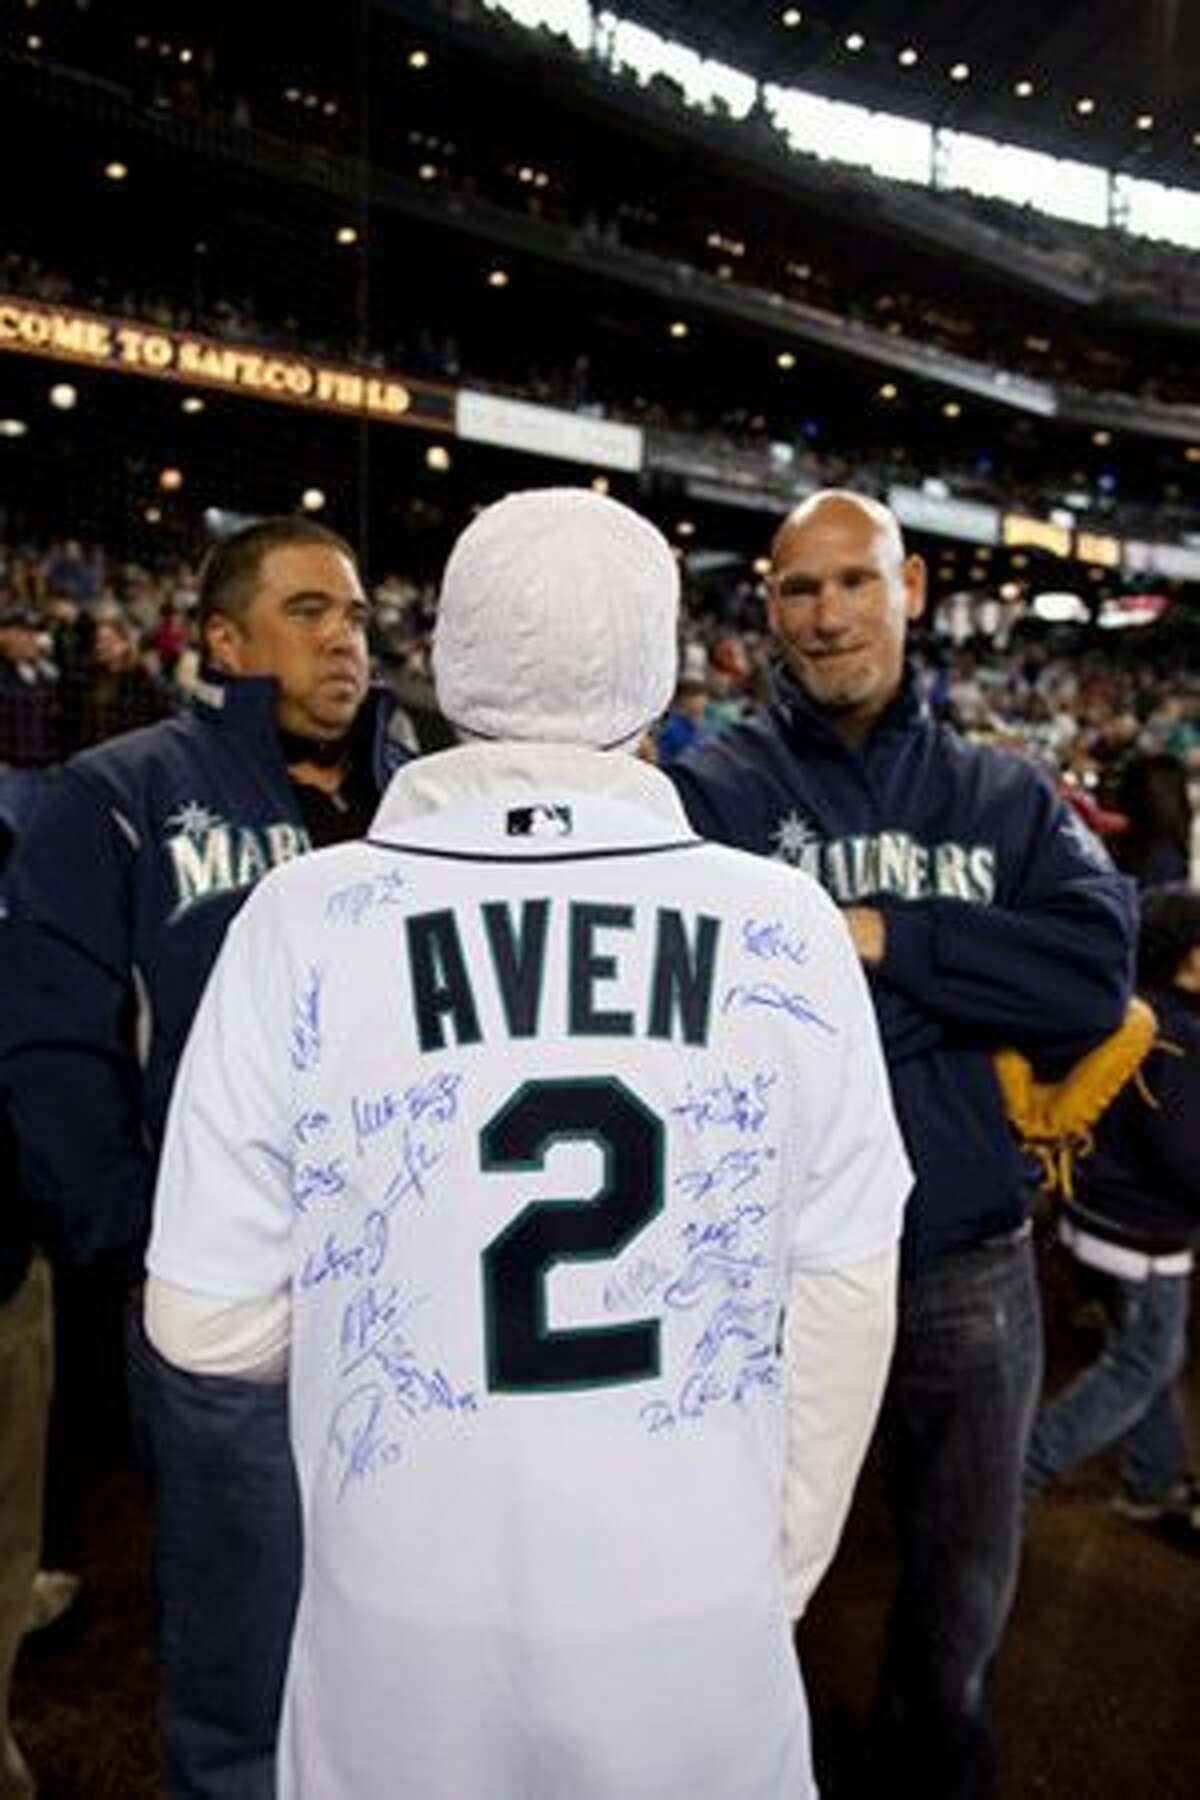 Ashley Aven greets former Mariners star Jay Buhner (right) before throwing out the first pitch at a recent Mariners game.